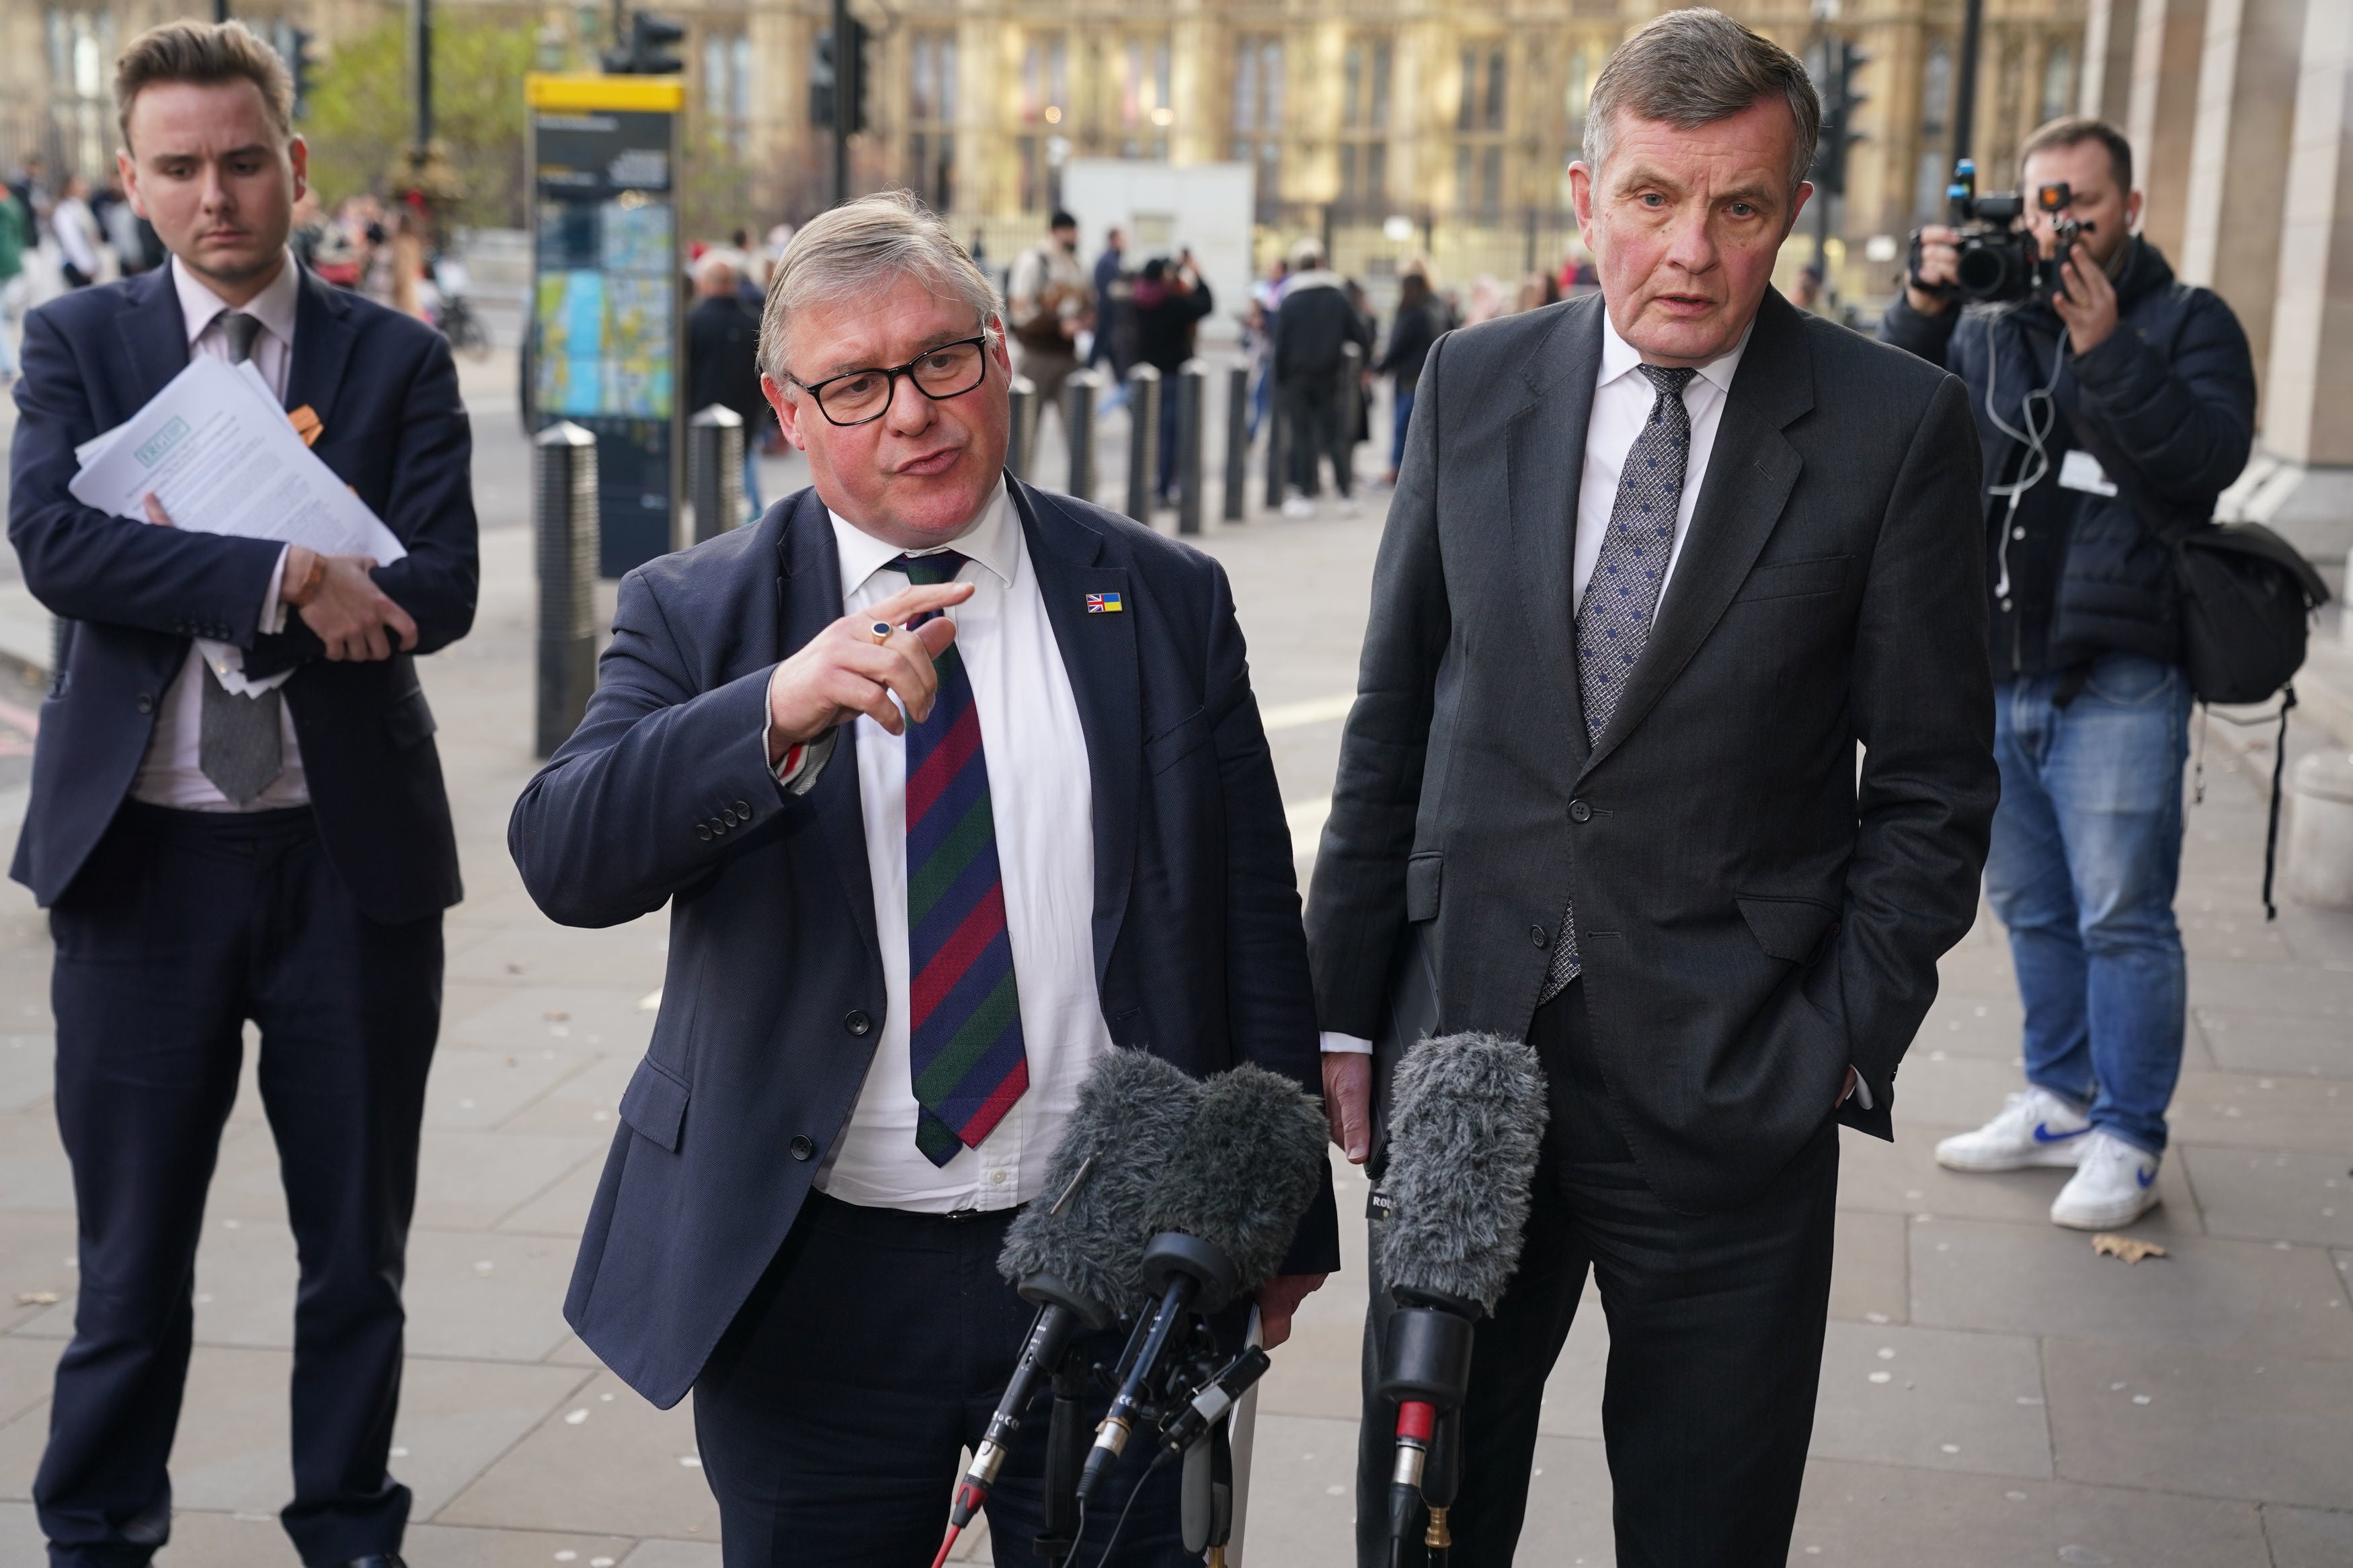 Mark Francois, implausibly the leader of one of the larger ideological groupings in the Conservative Party